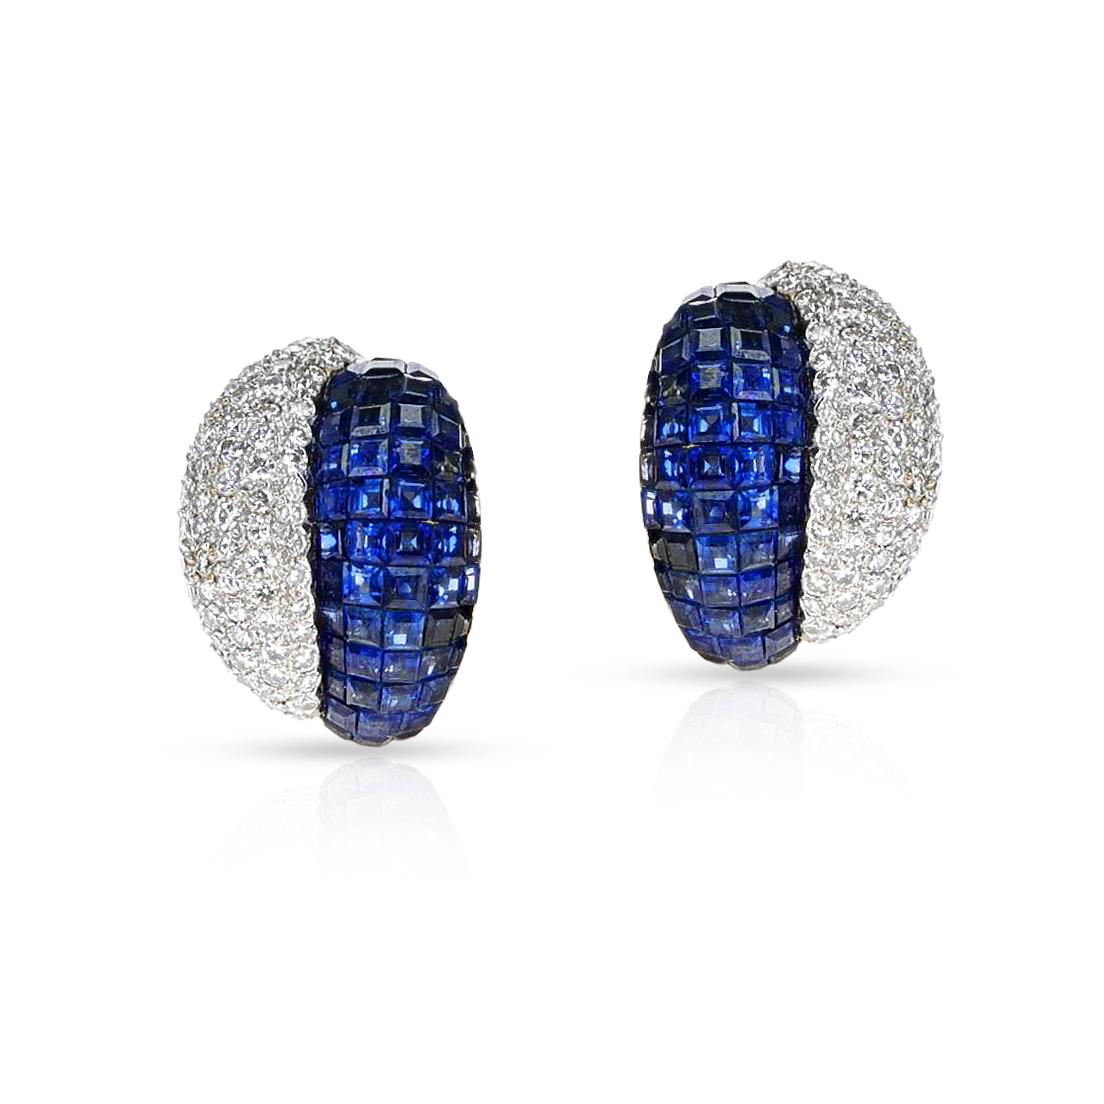 A breathtaking pair of Invisibly Set Blue Sapphire and Diamond Duo Earrings made in 18k gold. The total weight of the earring is 19.24 grams. 

SKU 1275-DGBERPL